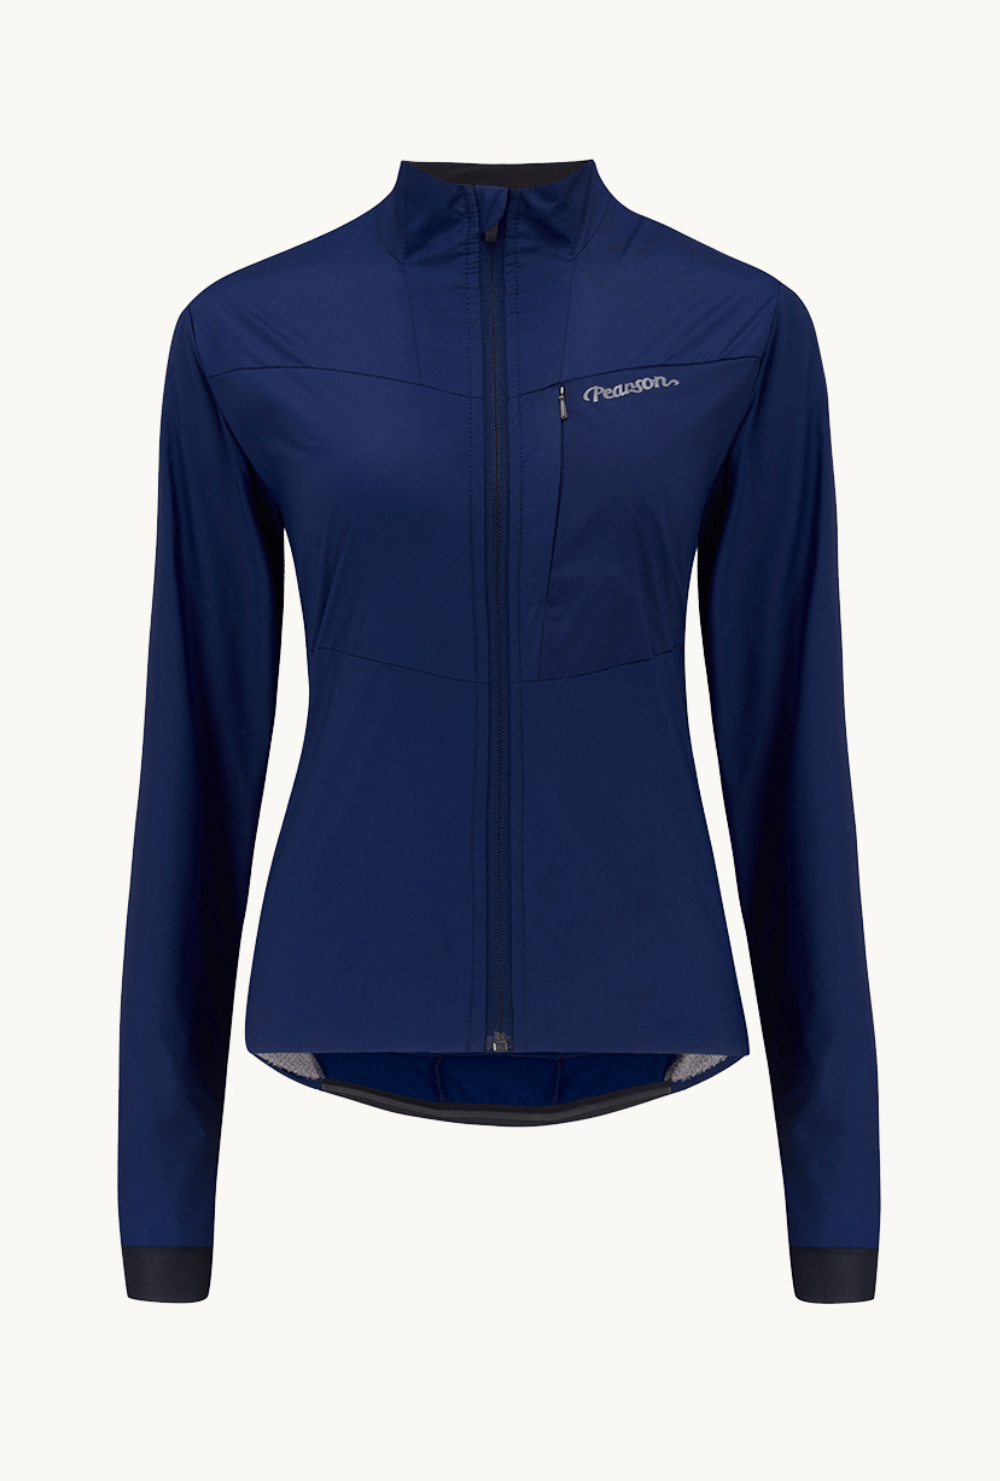 Pearson 1860  Test Your Mettle - Womens Road Insulated Jacket Blue Ink  Blue Ink / X-small